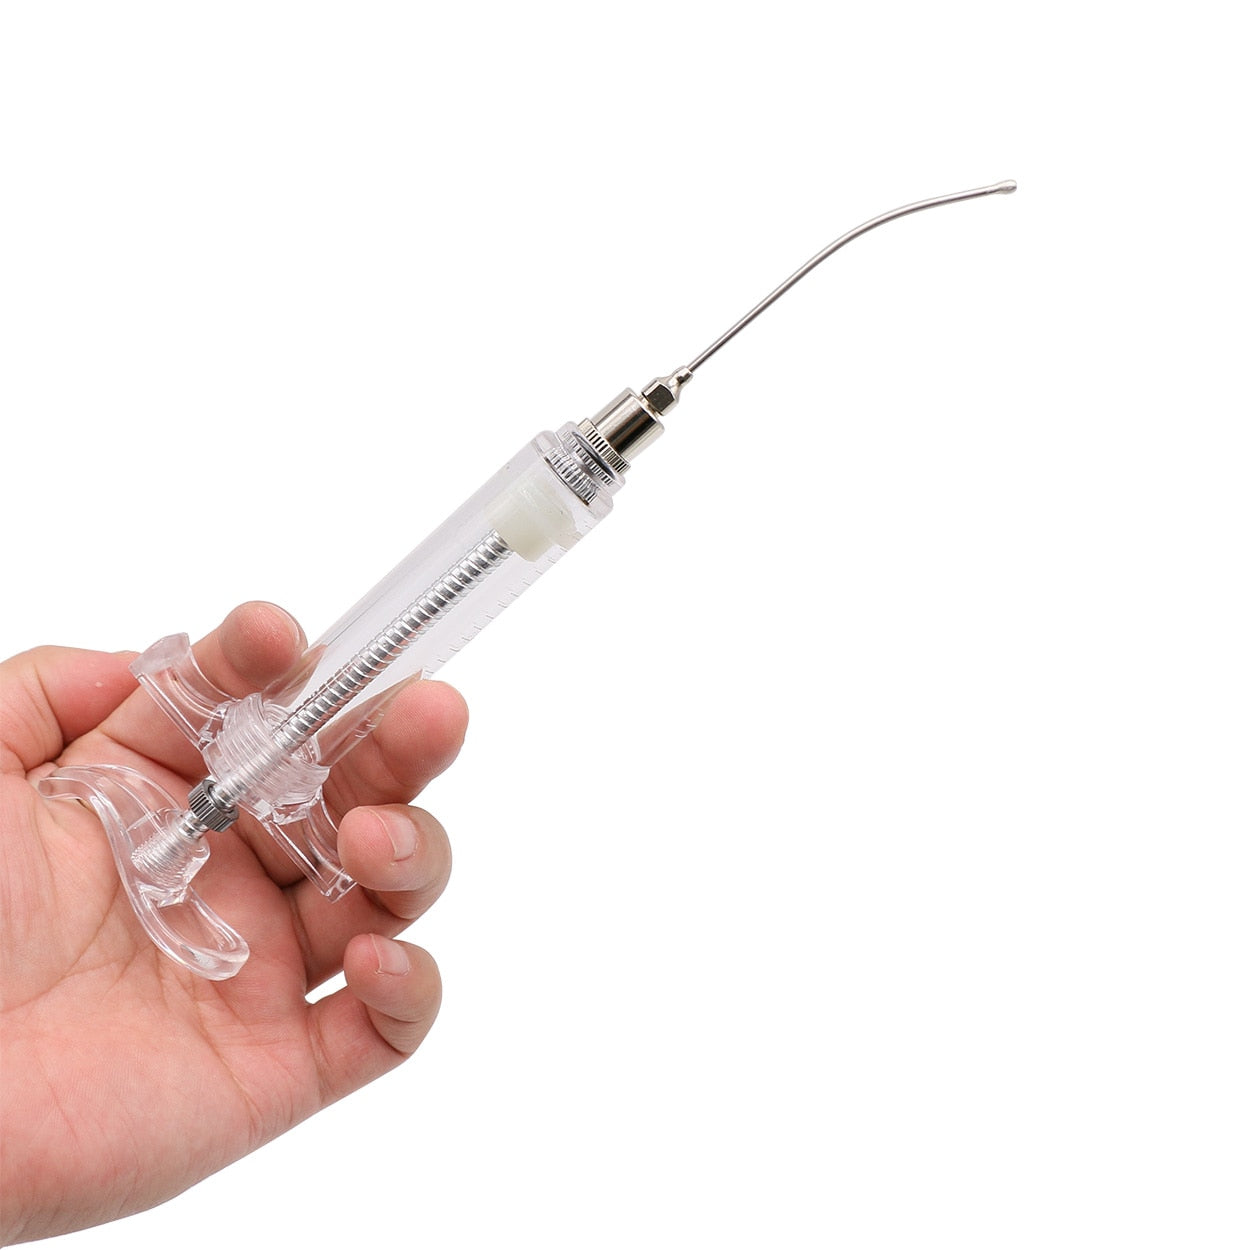 Feeding Syringe for Birds and Other Small Animals.